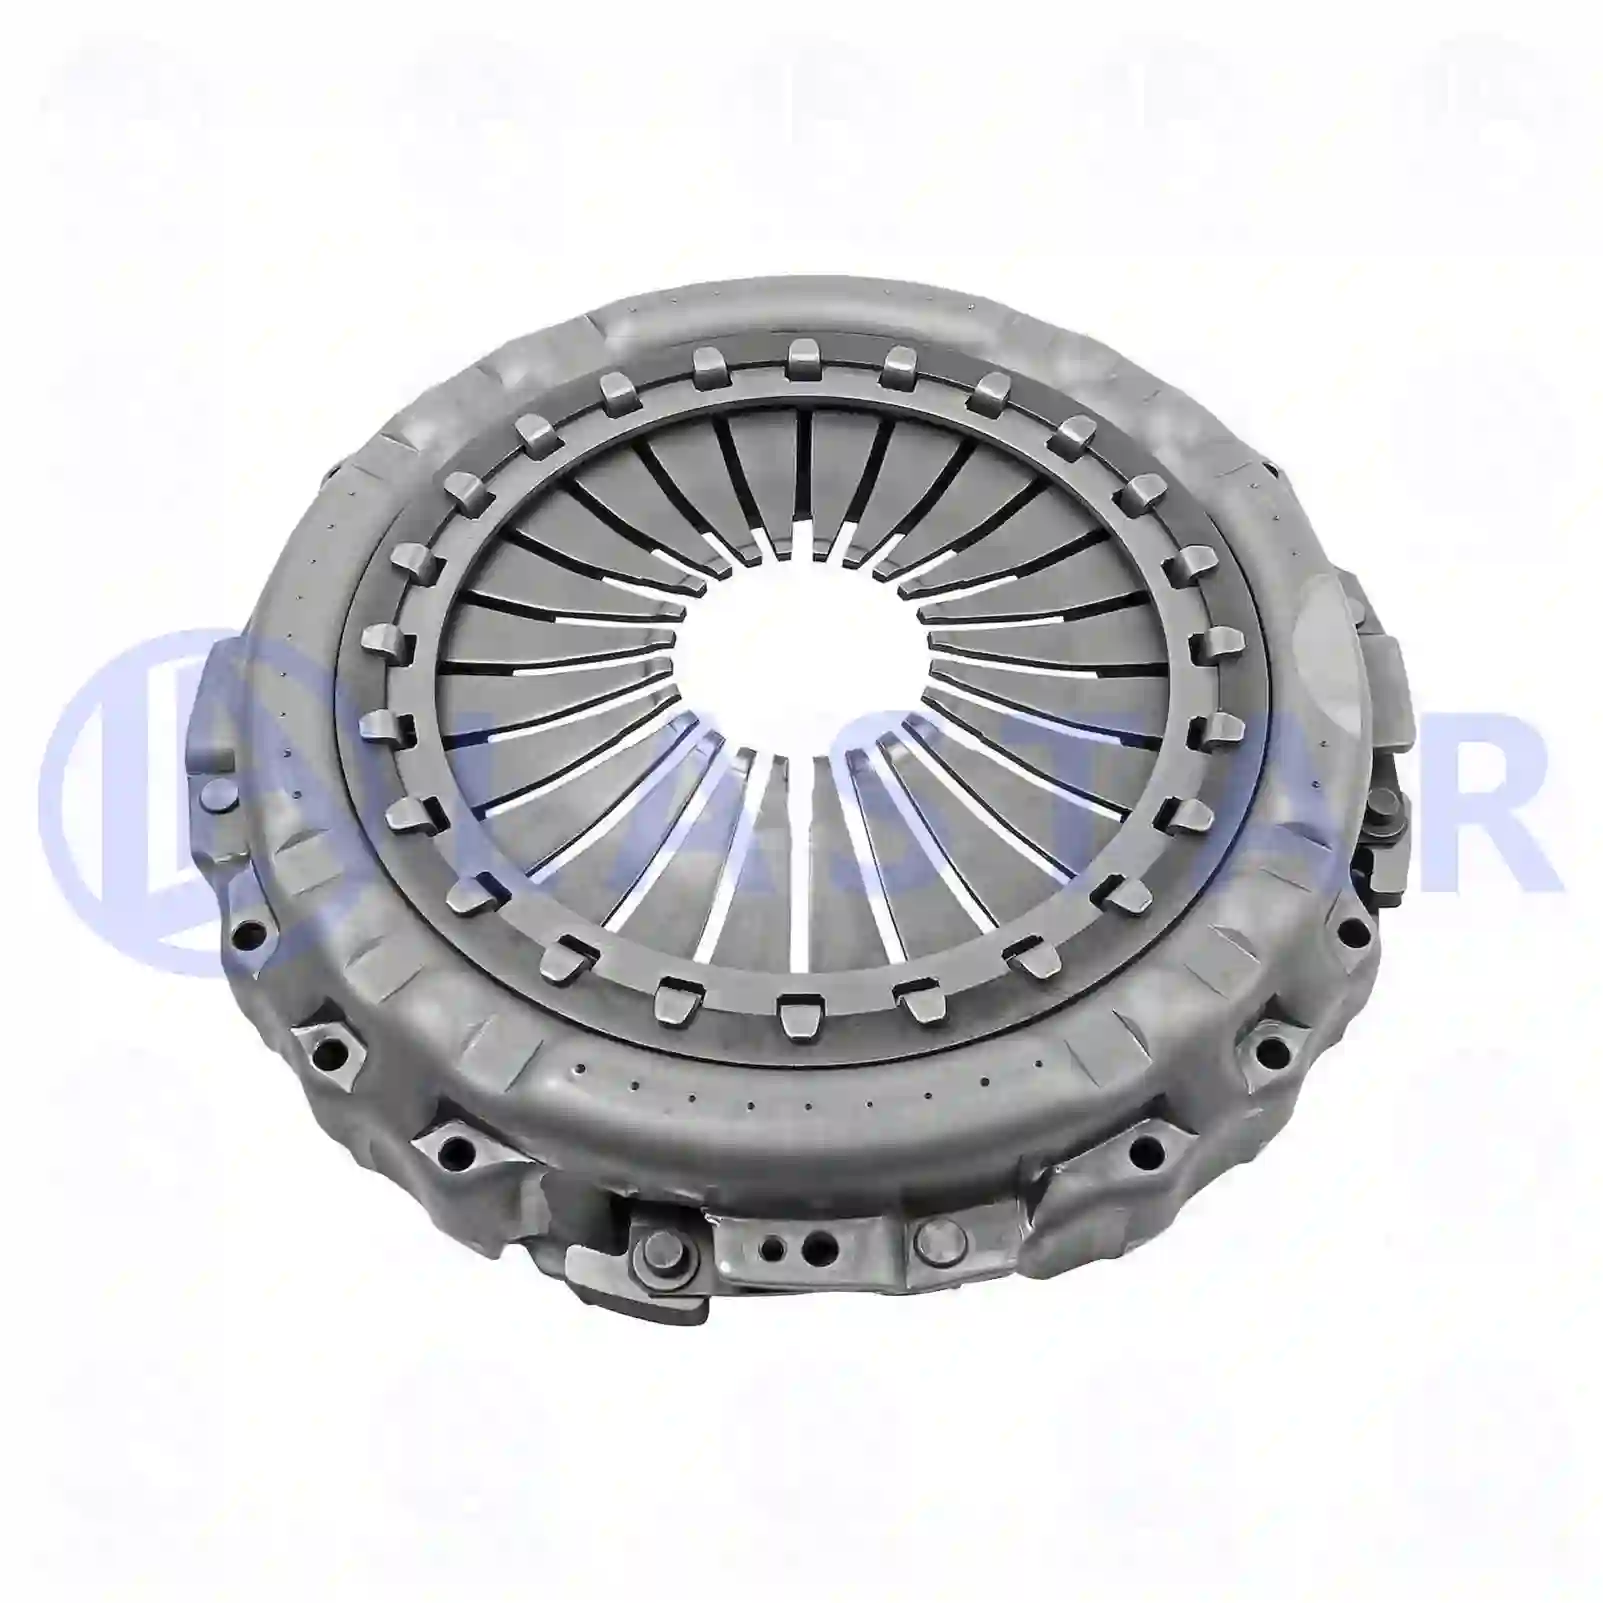 Clutch cover, 77722307, 21459173, 0020725526, 7420725526, 7420812085, 20484463, 20725526, 20806454, 85000624 ||  77722307 Lastar Spare Part | Truck Spare Parts, Auotomotive Spare Parts Clutch cover, 77722307, 21459173, 0020725526, 7420725526, 7420812085, 20484463, 20725526, 20806454, 85000624 ||  77722307 Lastar Spare Part | Truck Spare Parts, Auotomotive Spare Parts